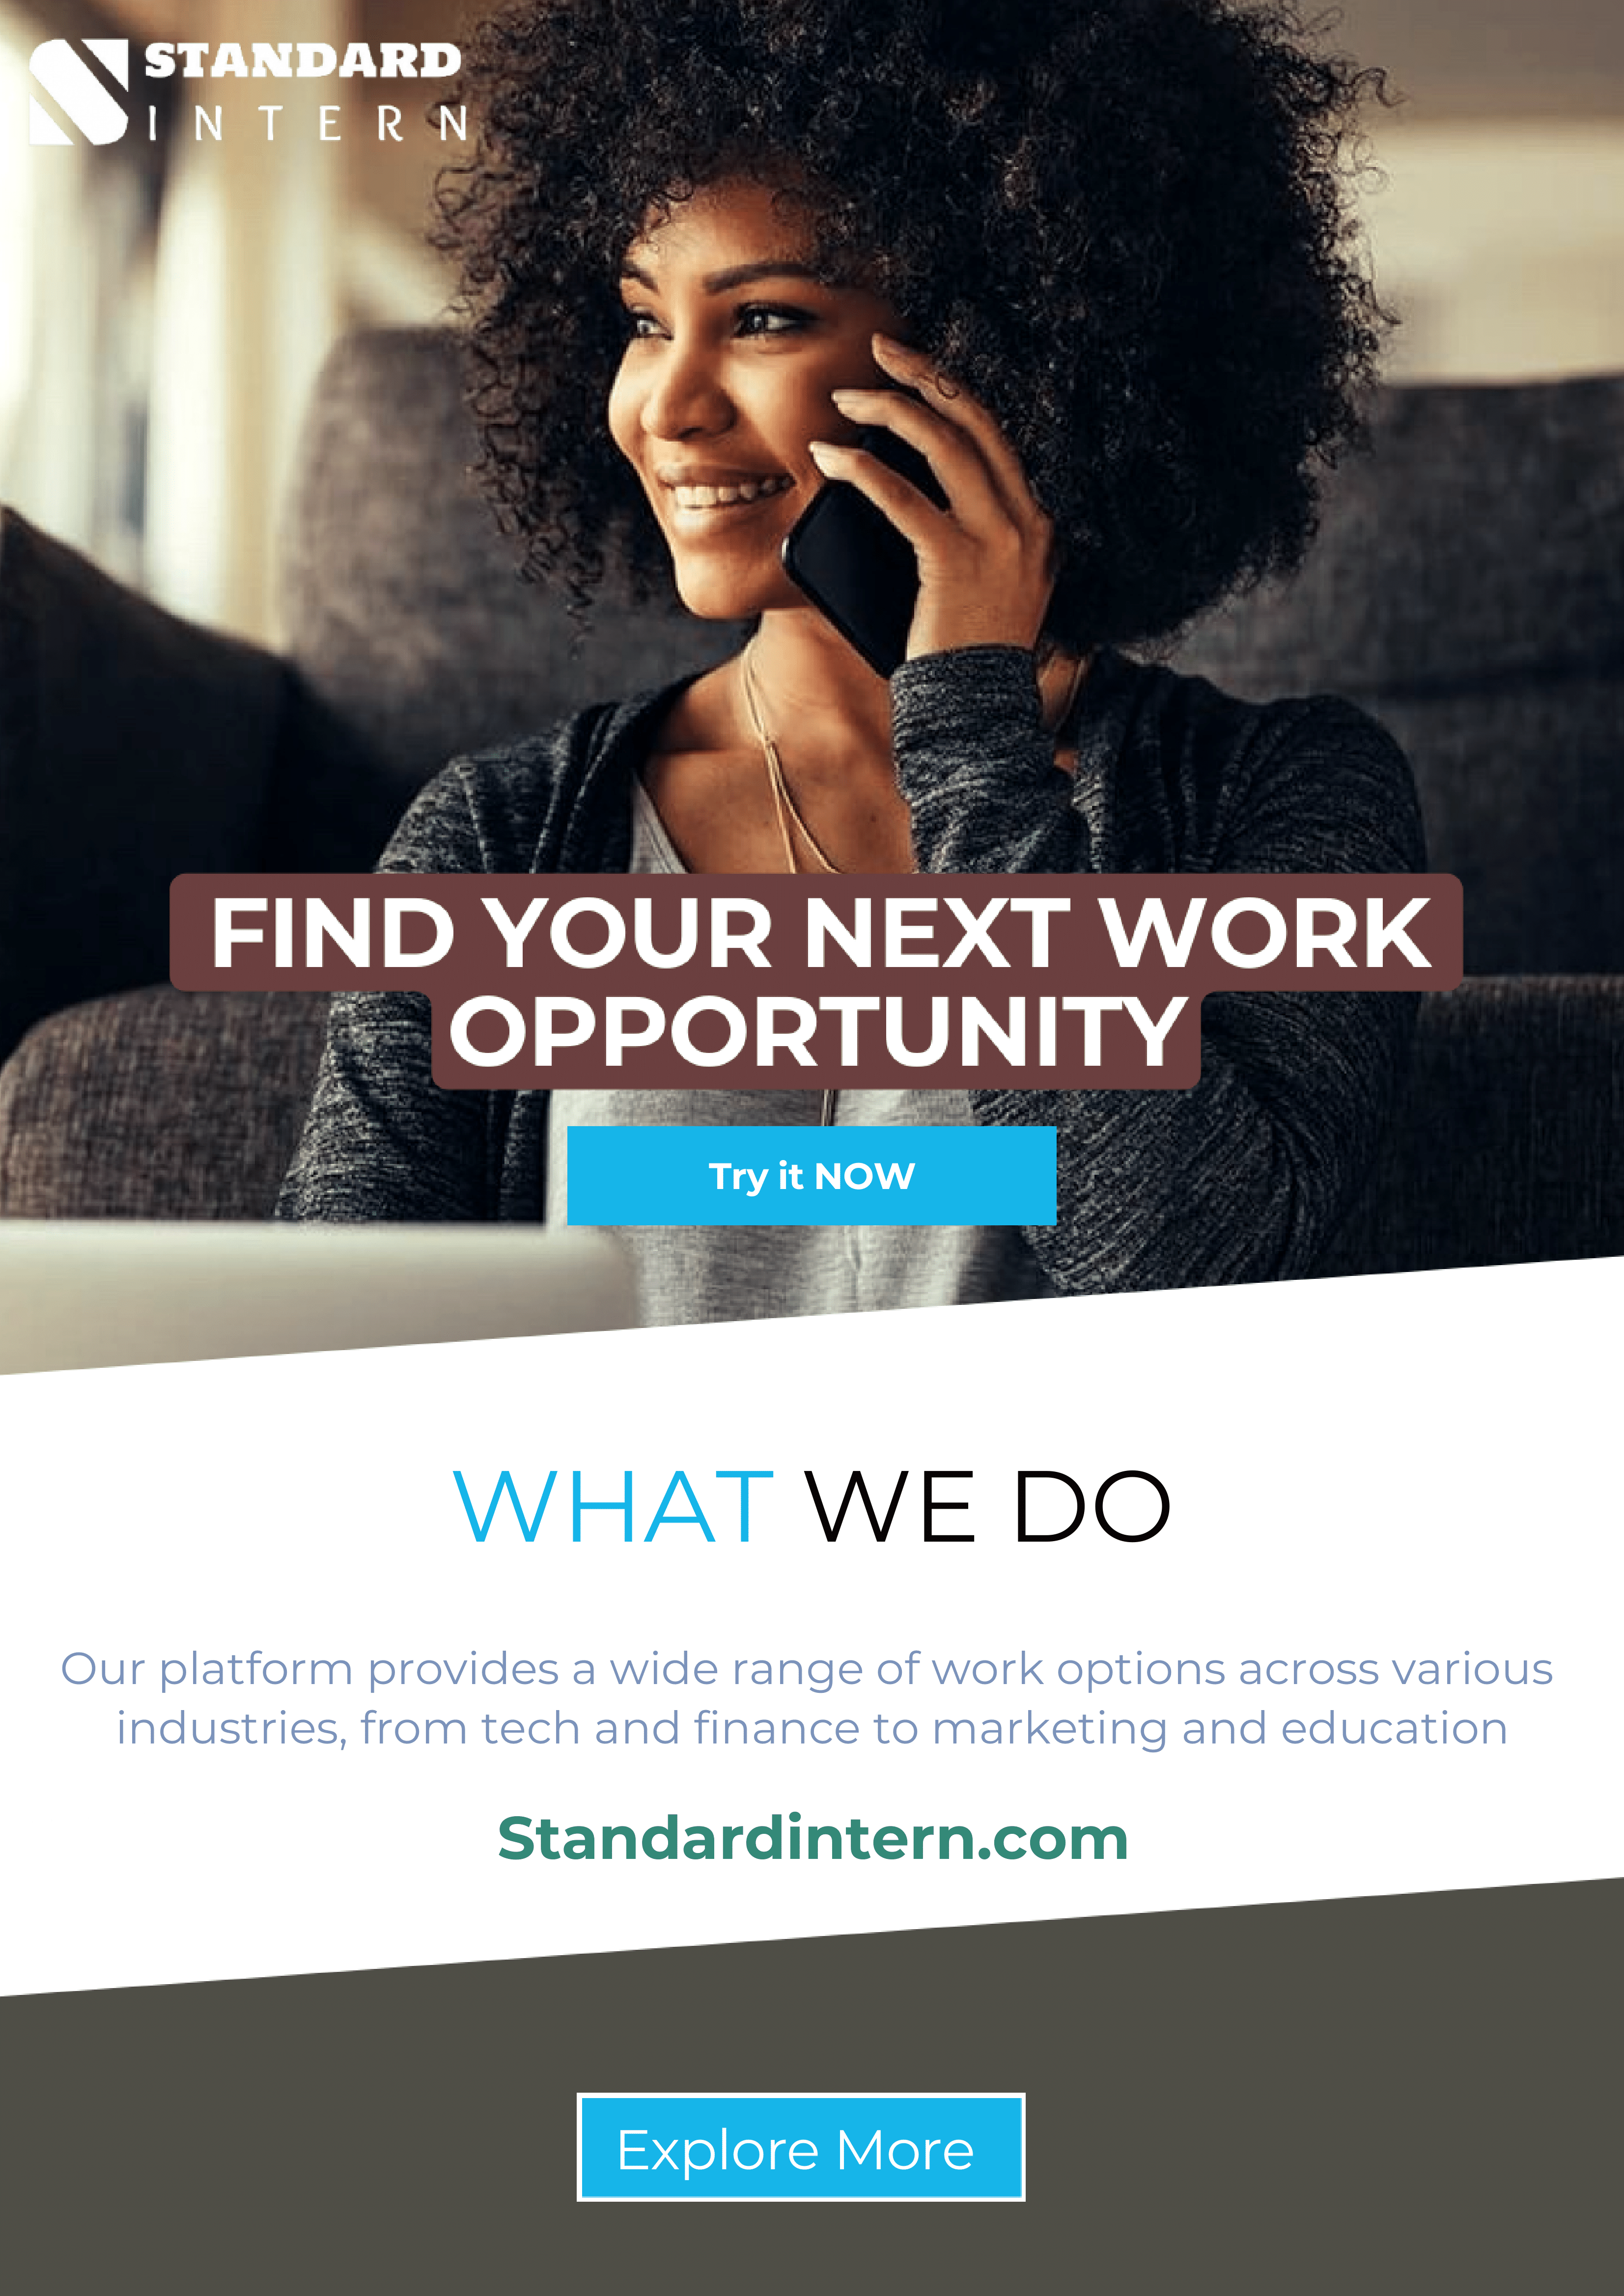 Empowering the Next Generation: How Standard Intern Supports Young Professionals